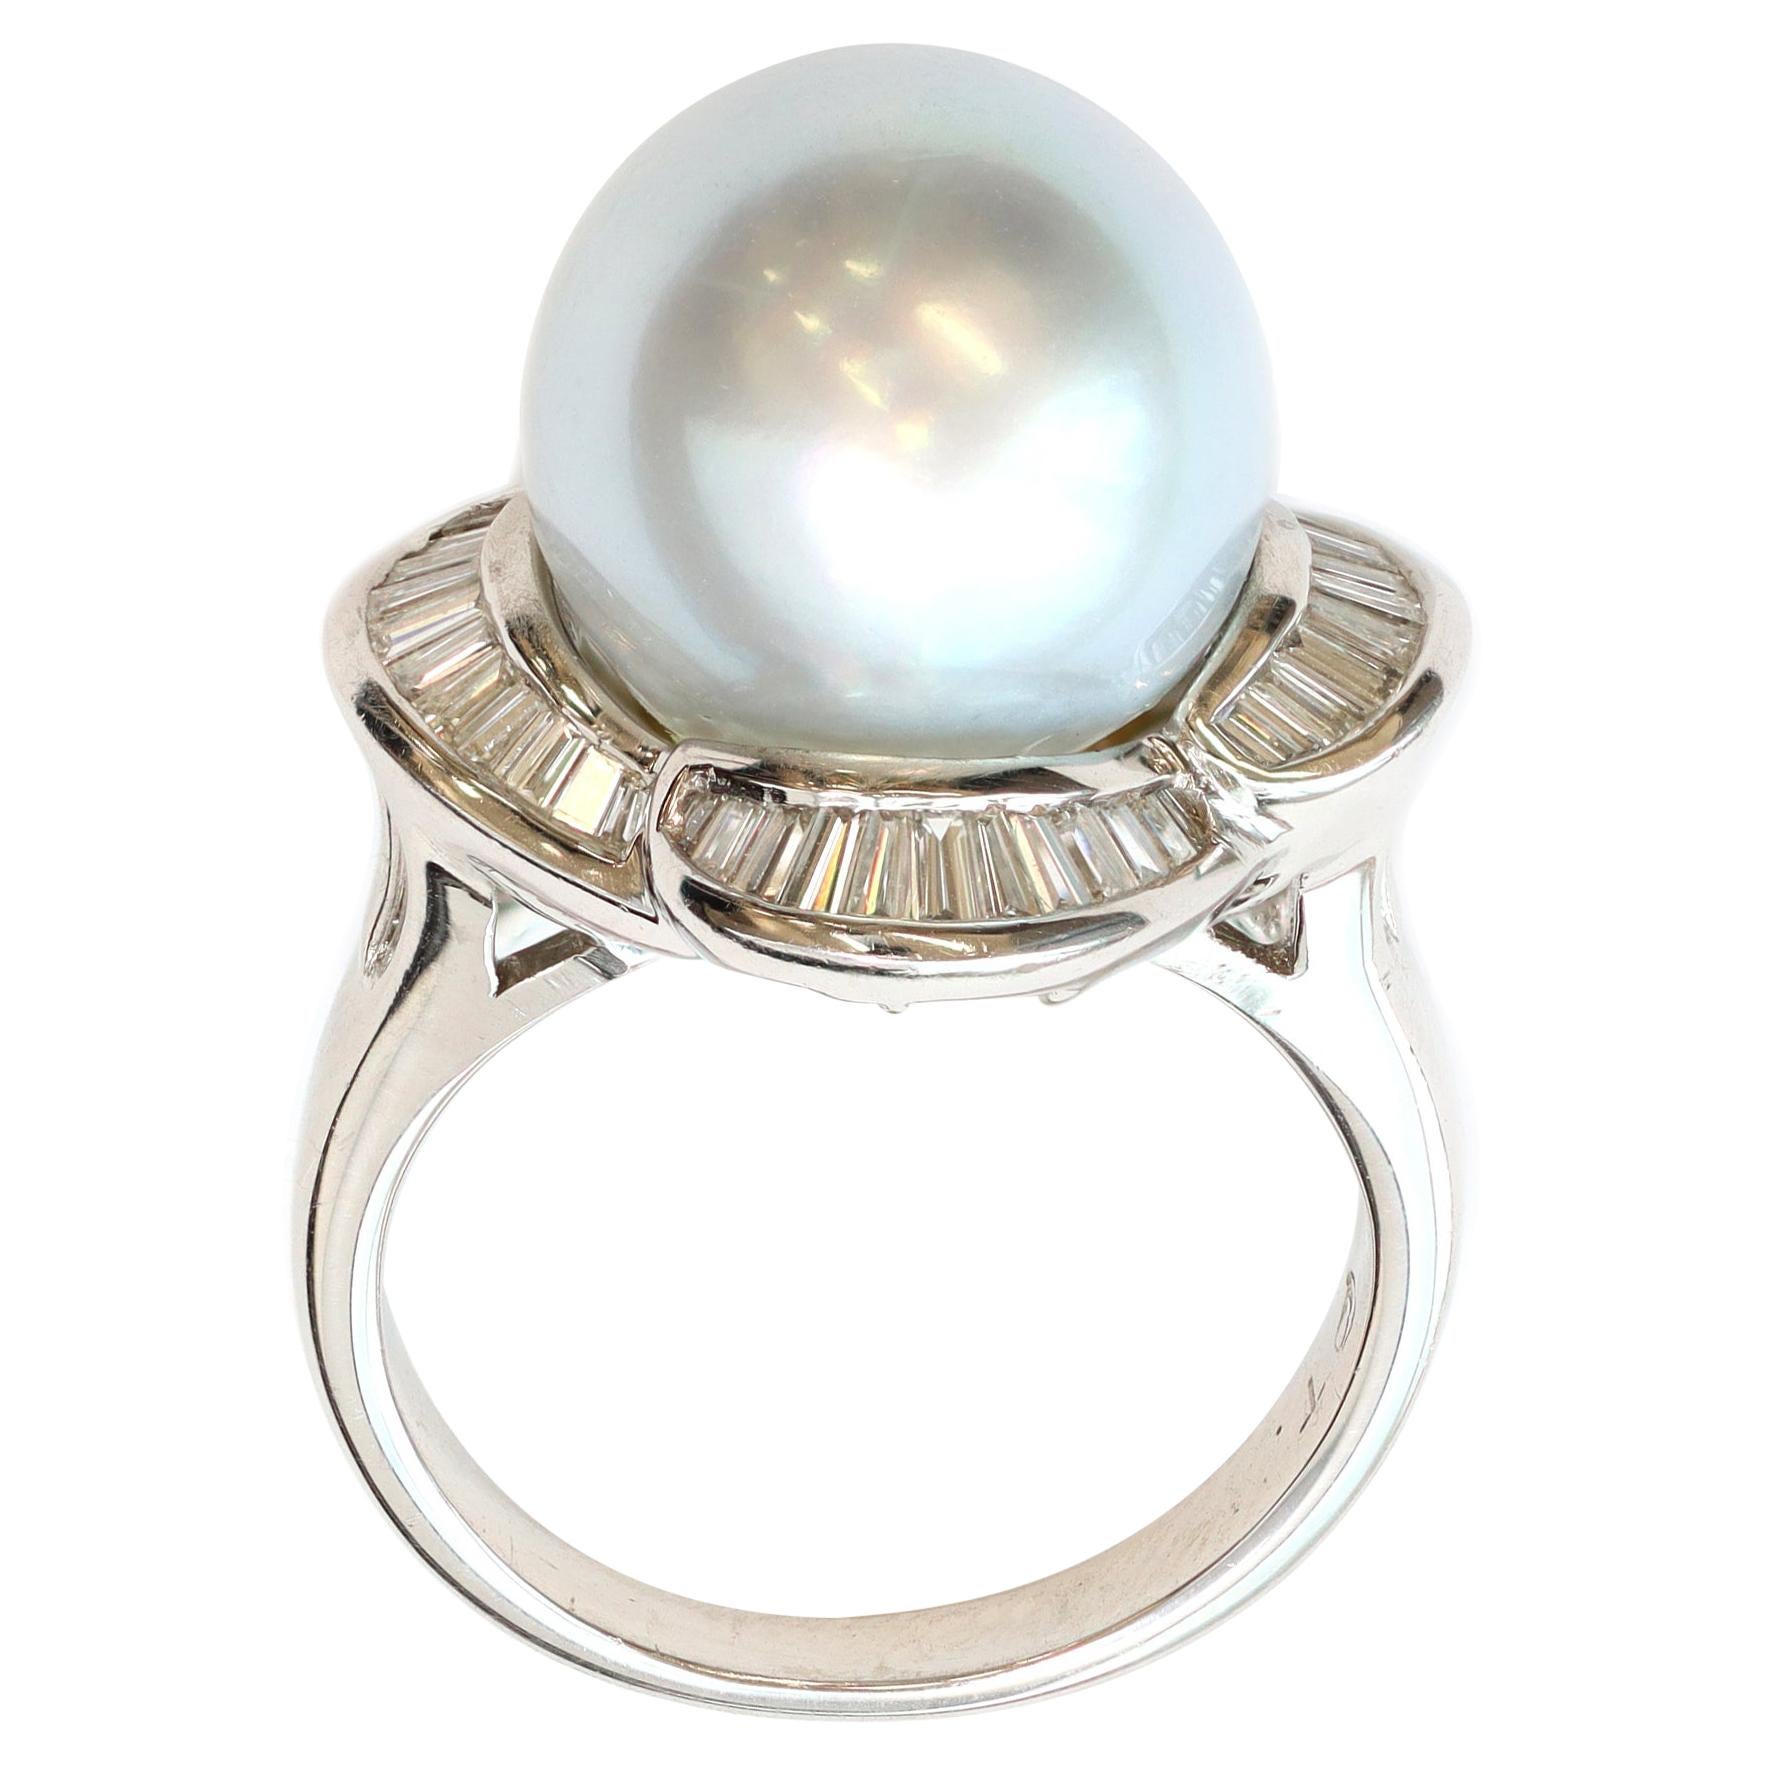 A ballerina style cocktail ring circa 1980 featuring a round south sea pearl with baguette diamonds set in platinum in a scalloped style mounting. The large white silvery pearl presents minor surface inclusions and measures 13 millimeters. The